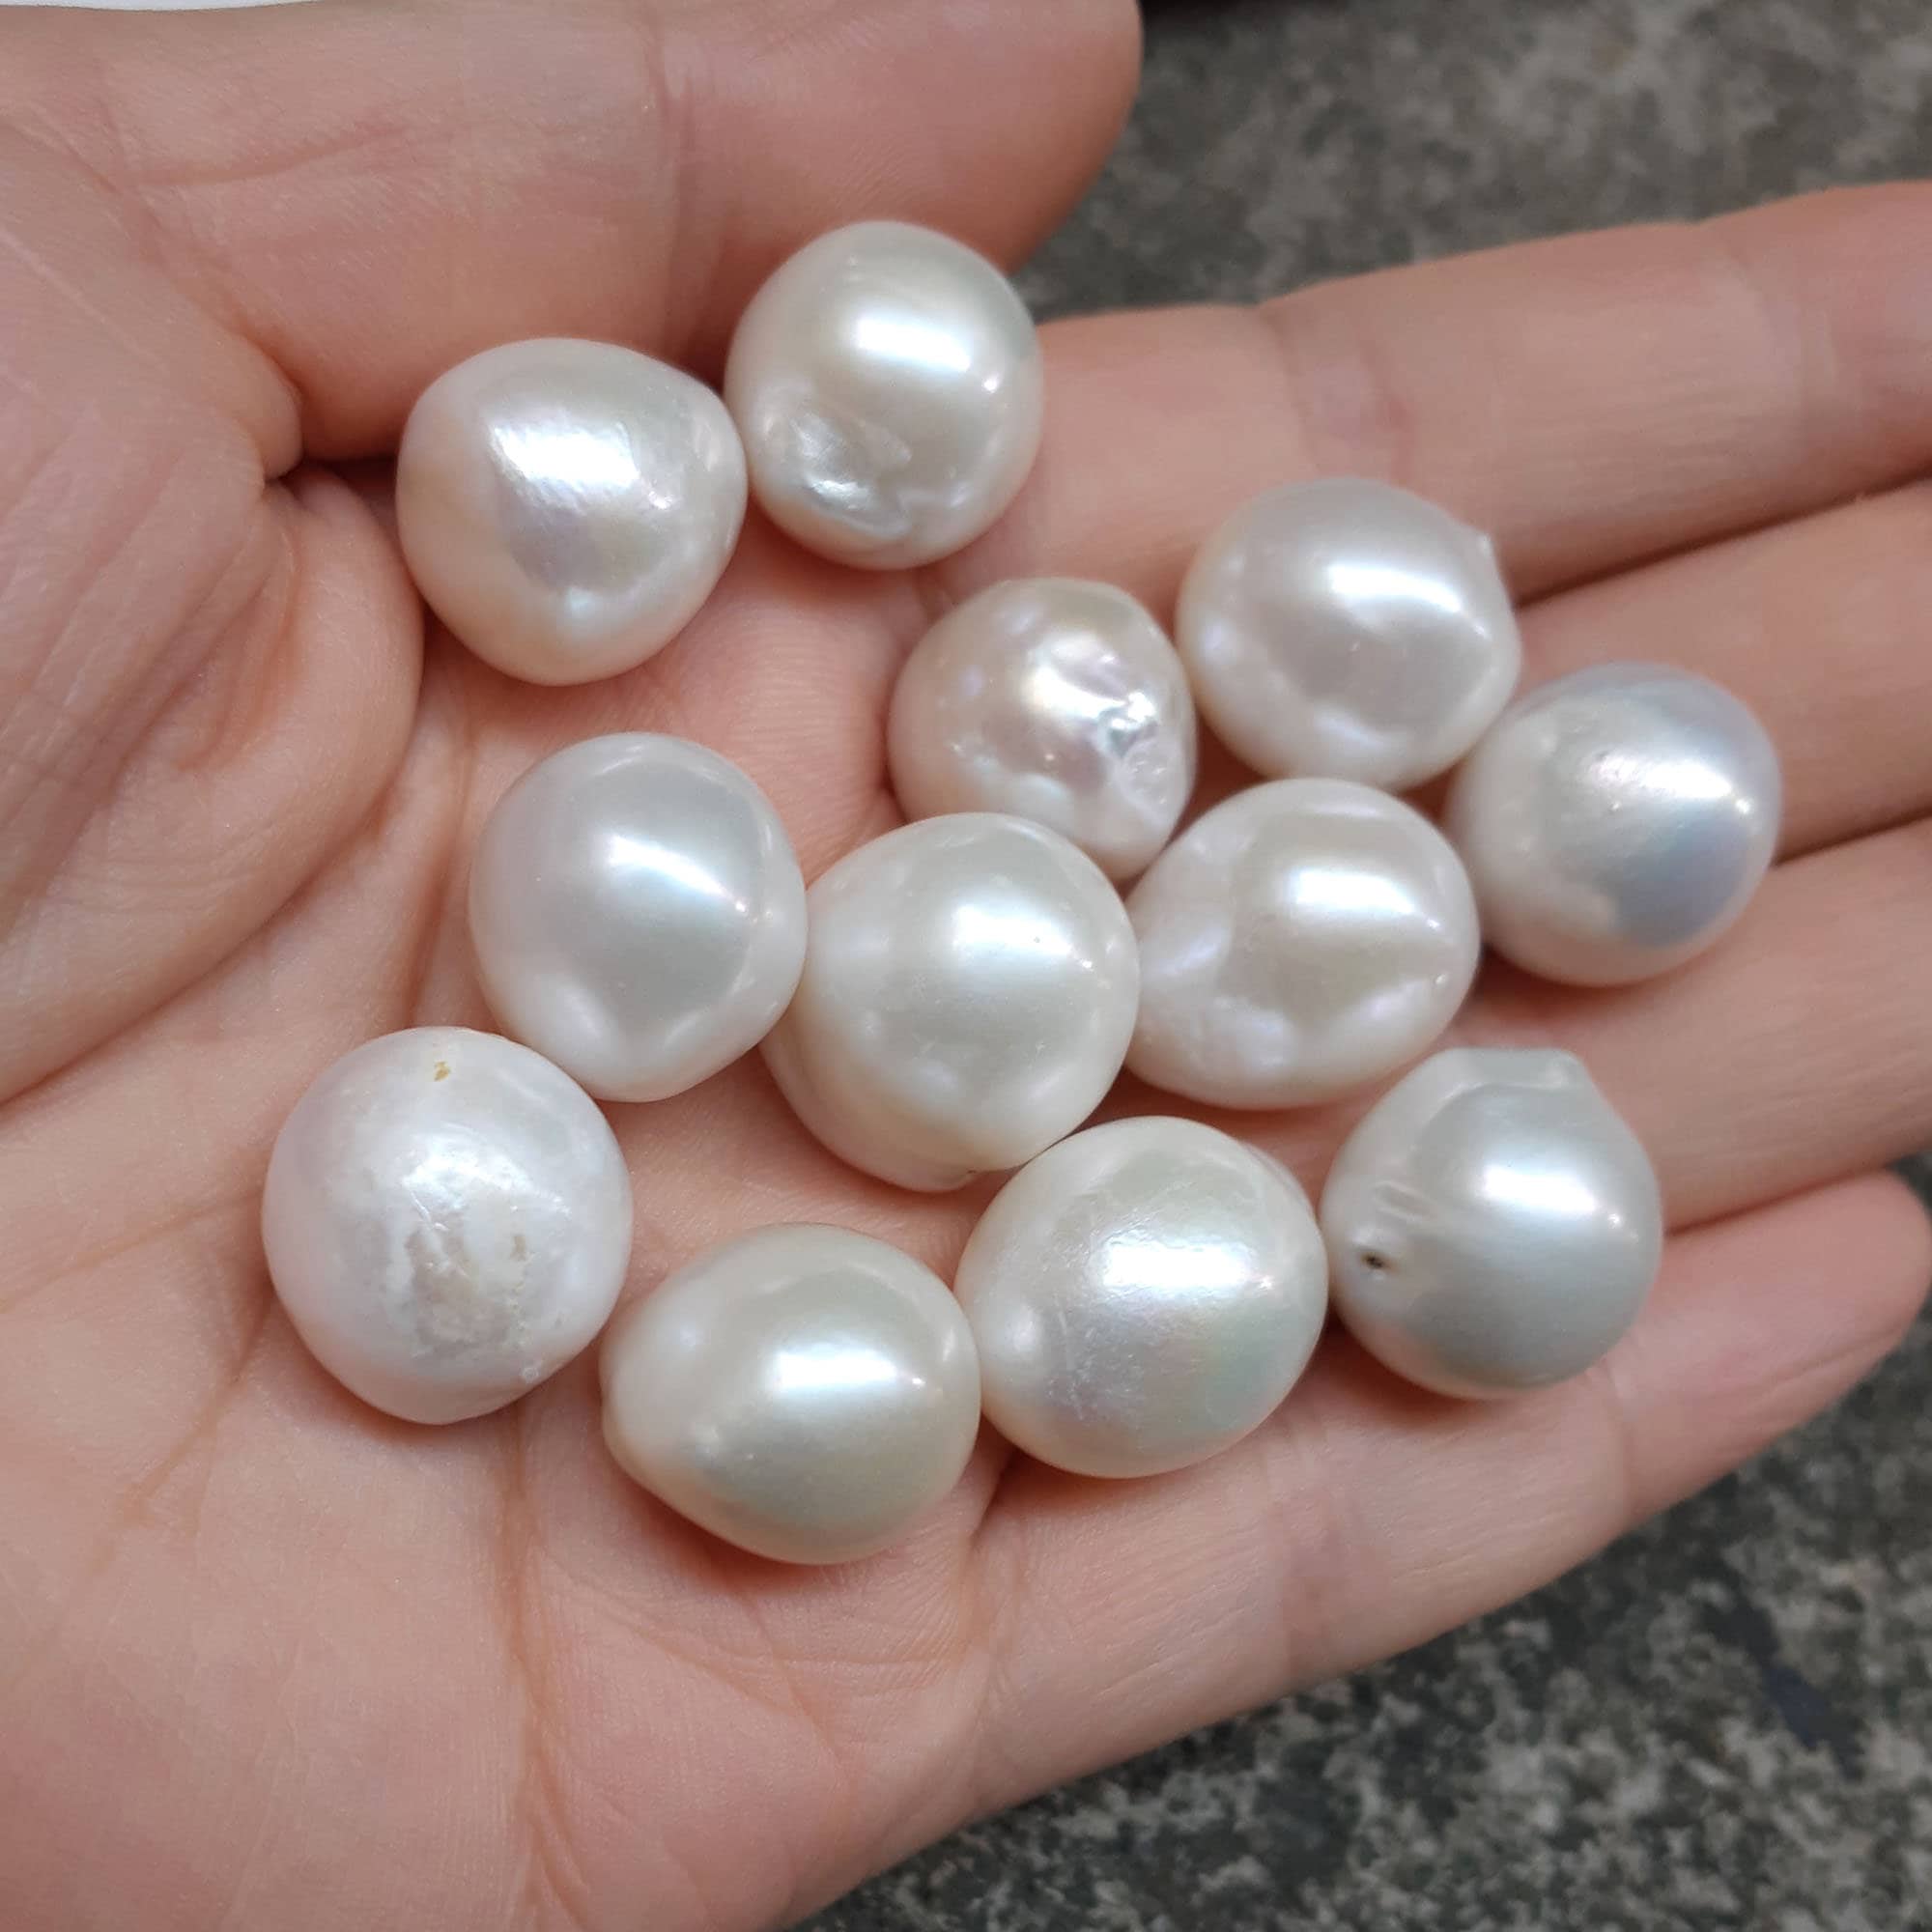 14-20mm Large Baroque Pearls, Natural White Pearls, Irregular Shape Pearl  Beads for Jewelry, Single Pearl,pb970 